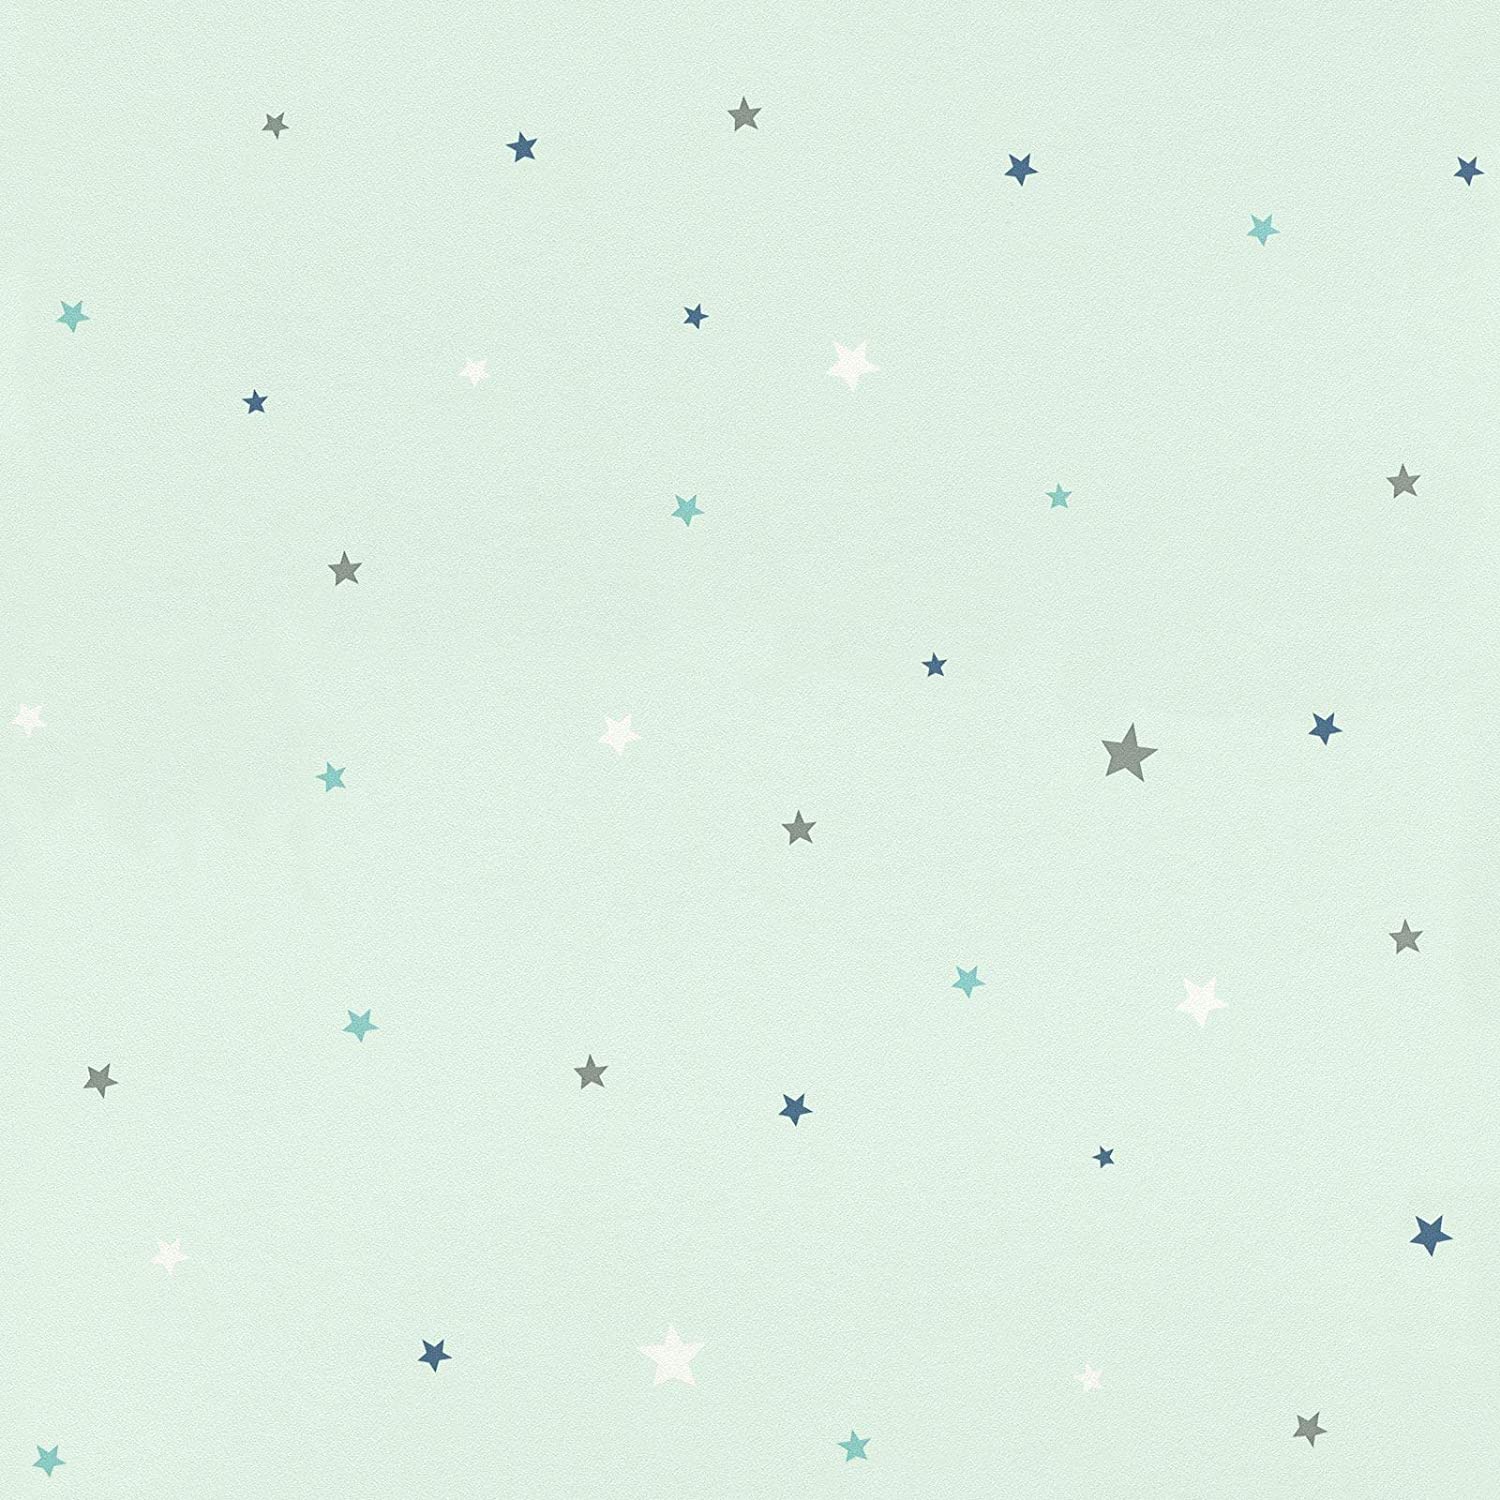 A starry wallpaper with a mix of blue and grey stars - Light green